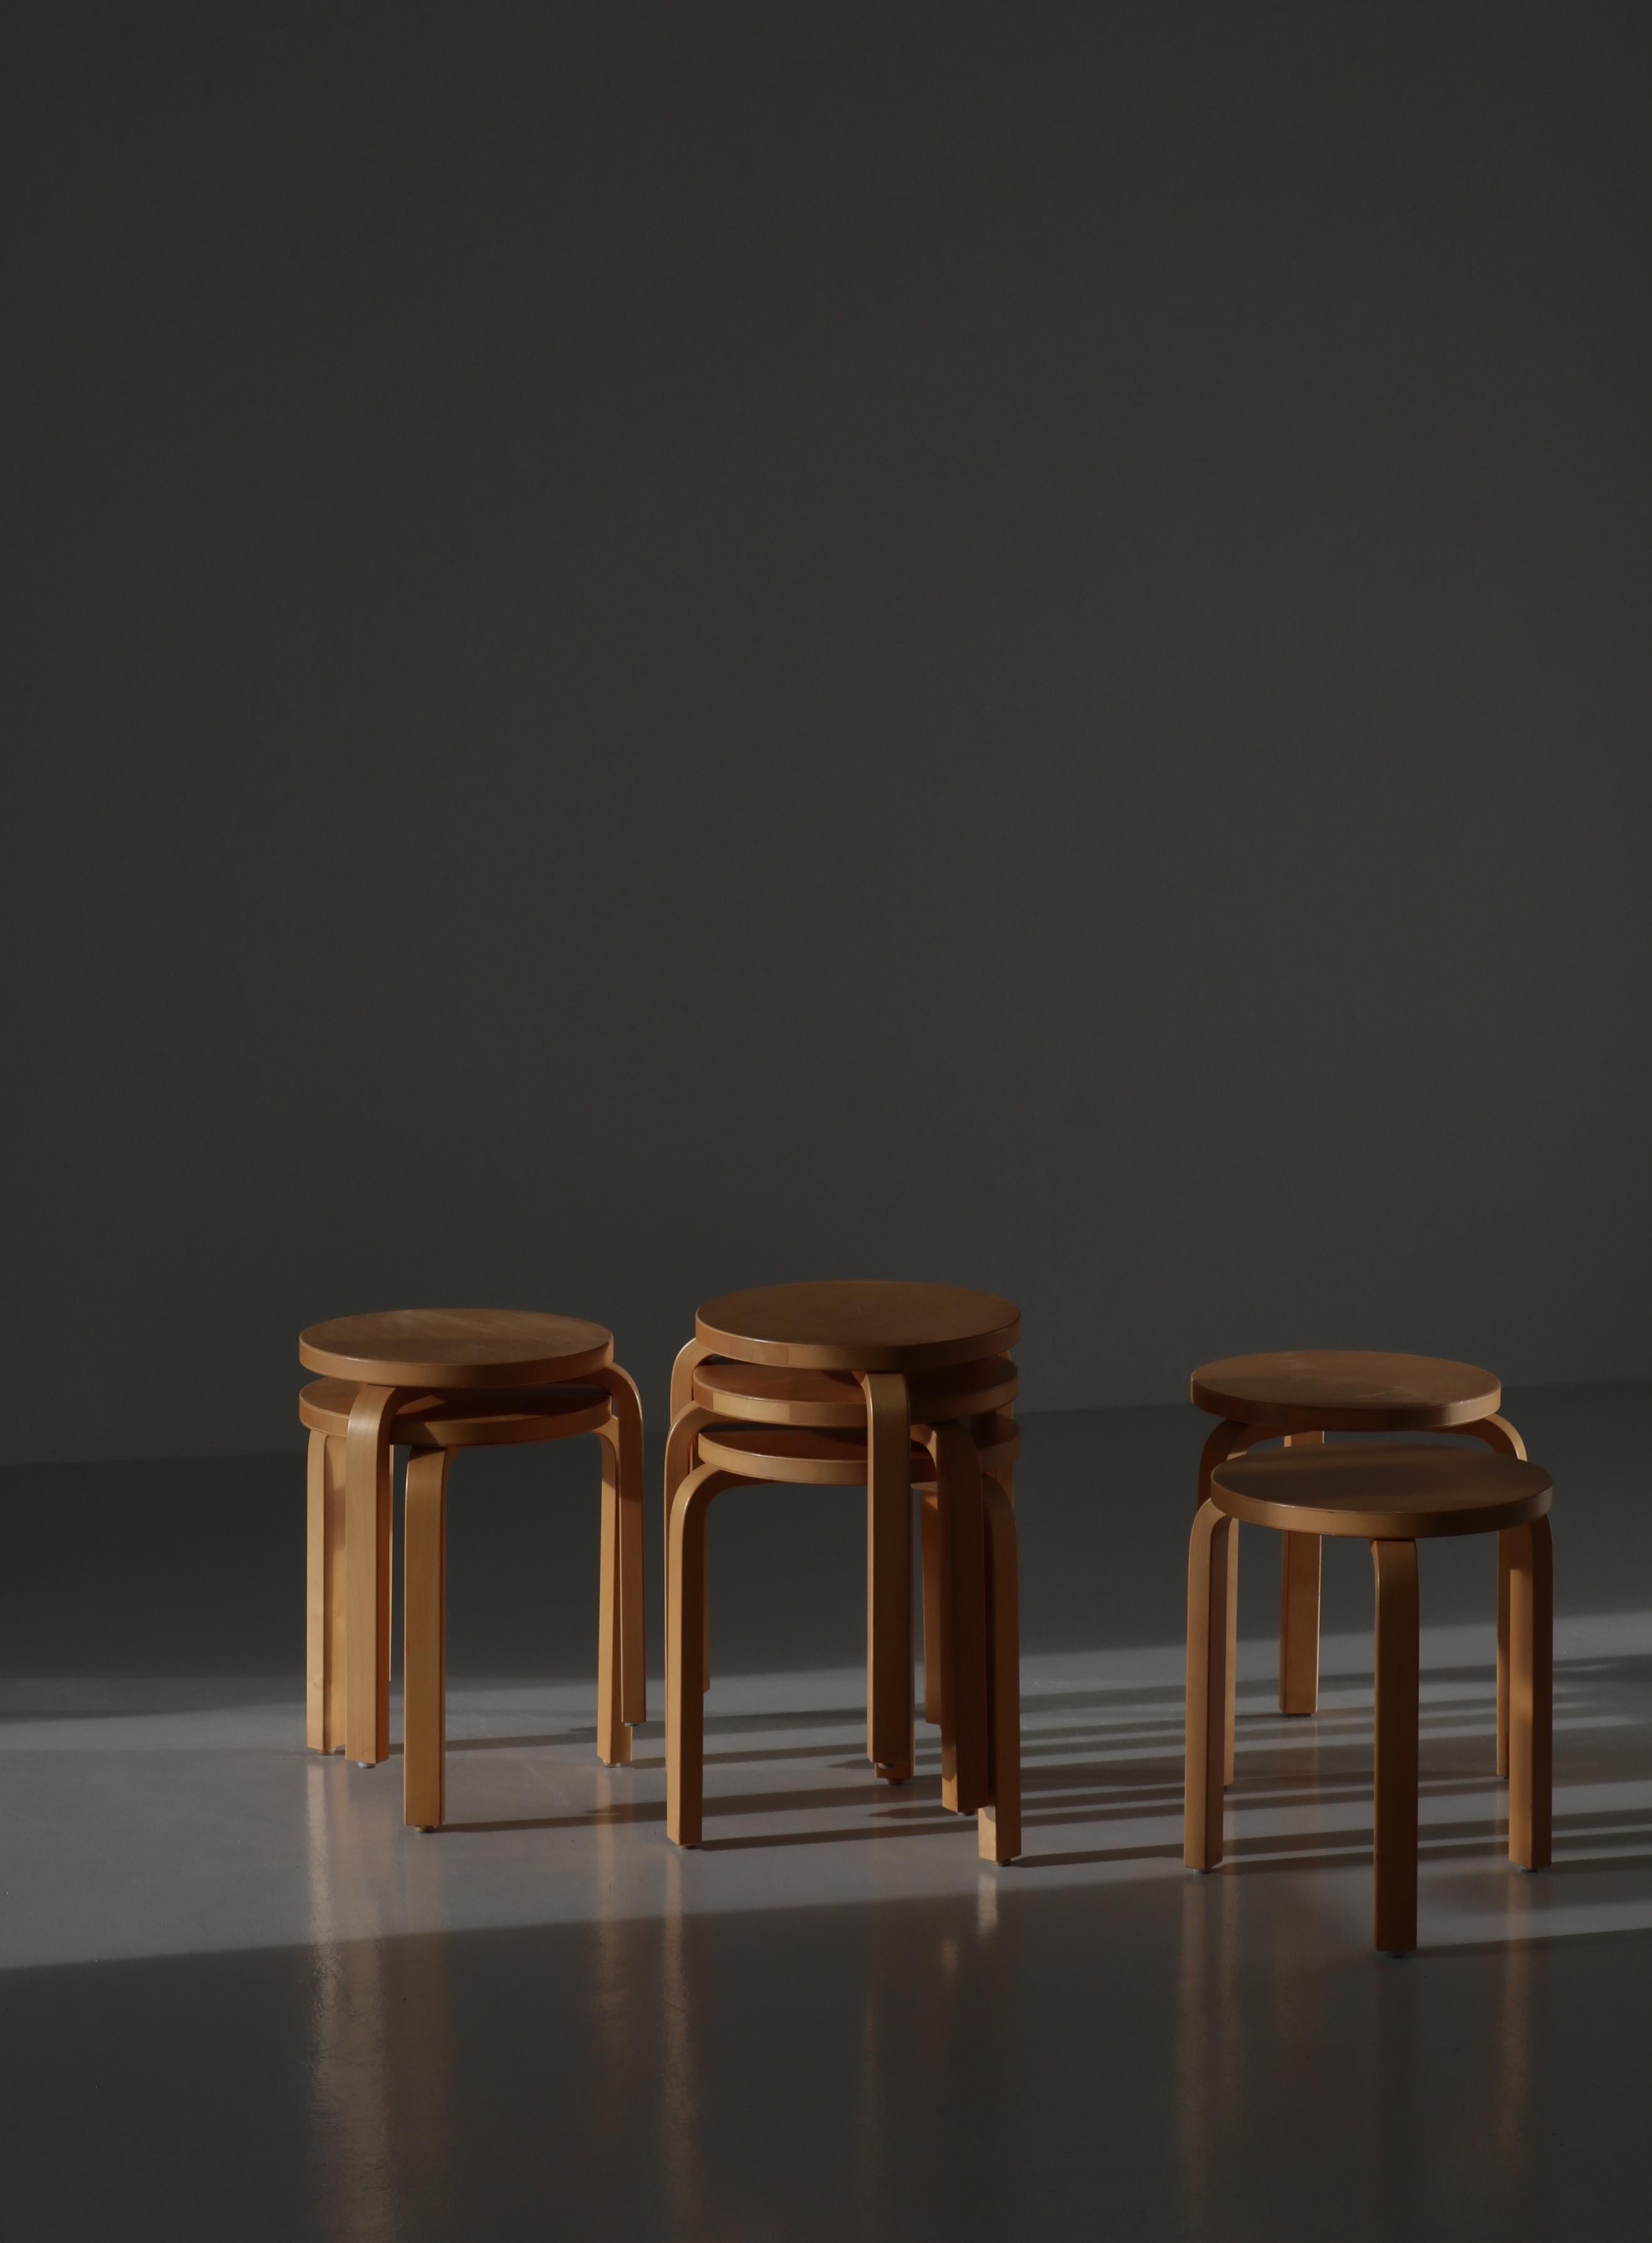 Set of 7 beautifully patinated L-leg stools by Alvar Aalto in laminated birch. Bought in Denmark in the 1970s at Paustian.
Alvar Aalto’s Three-legged stool model 60 designed in 1934 is the most elemental of furniture pieces, equally suitable as a